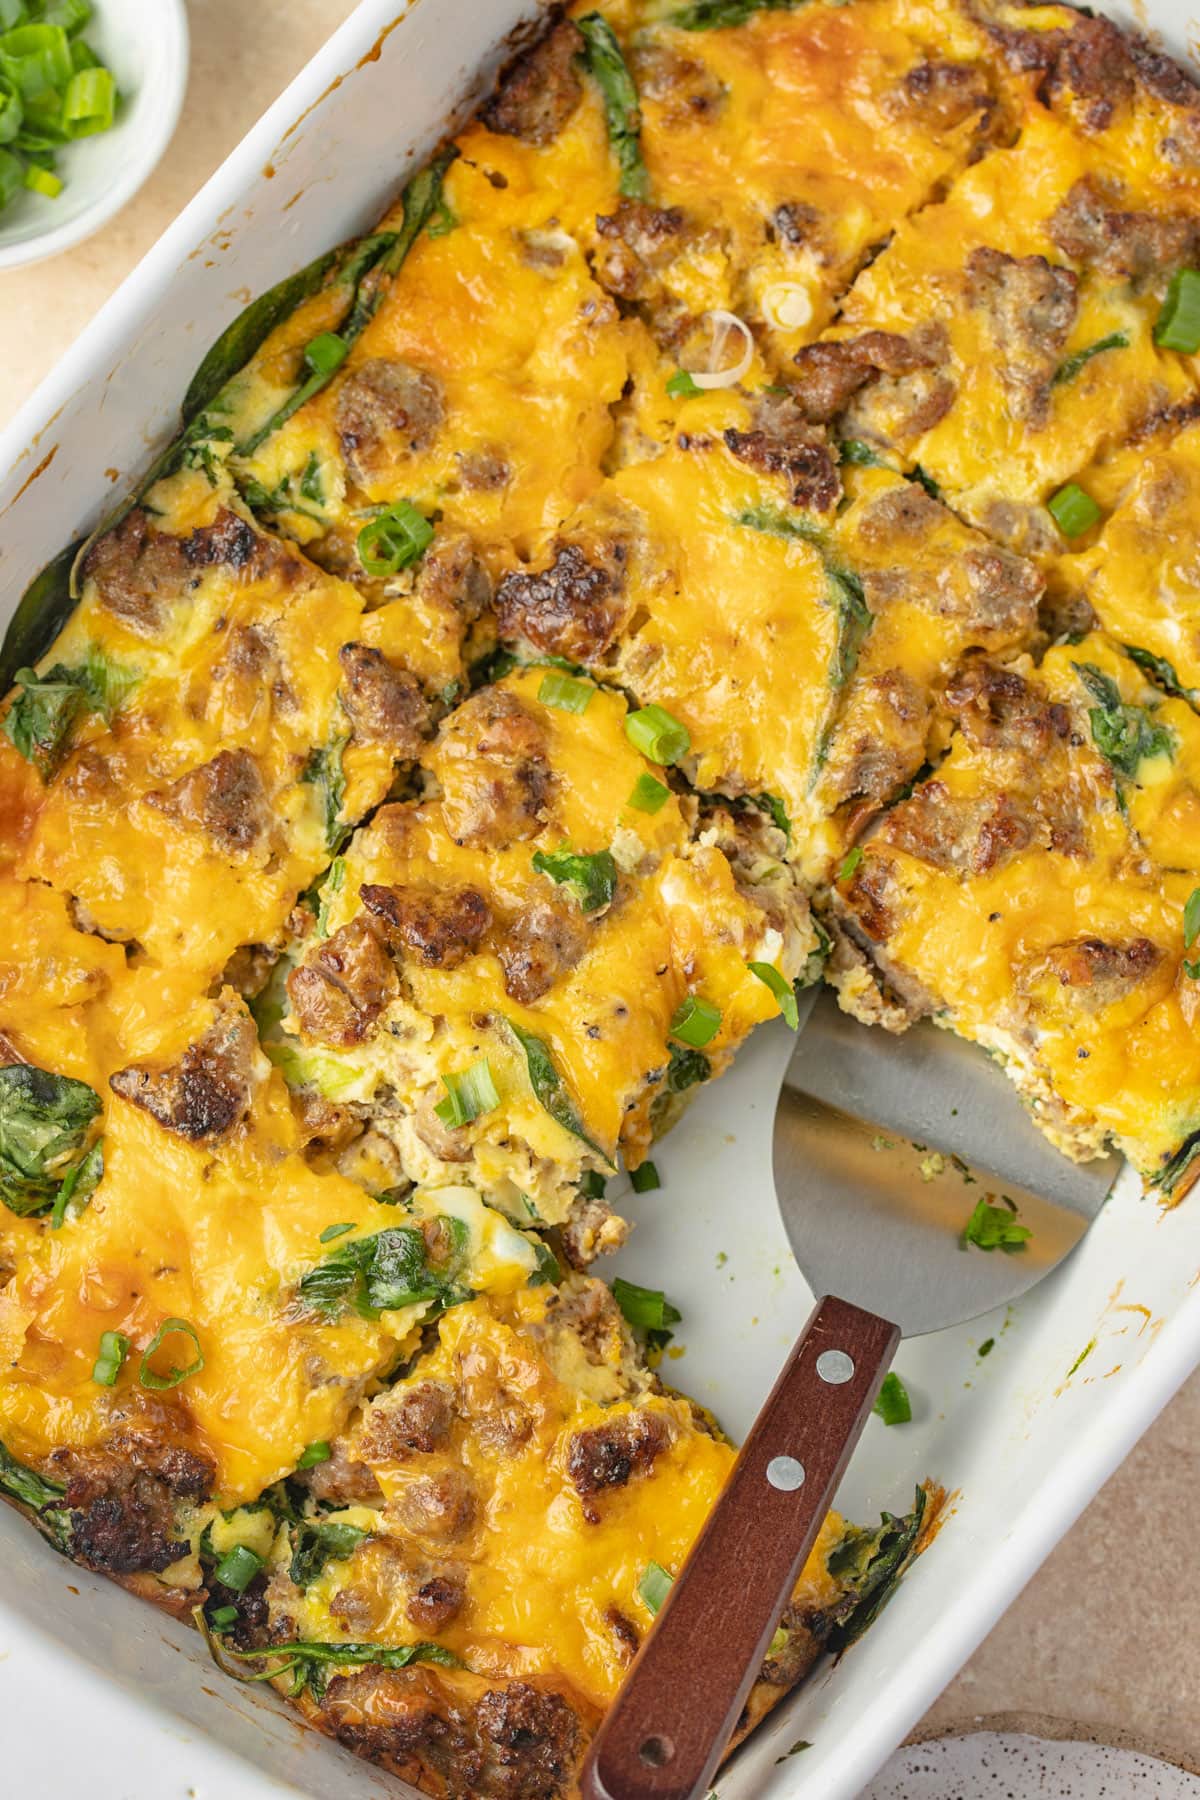 Overhead view of a keto sausage, egg, and cheese breakfast casserole in a casserole dish.